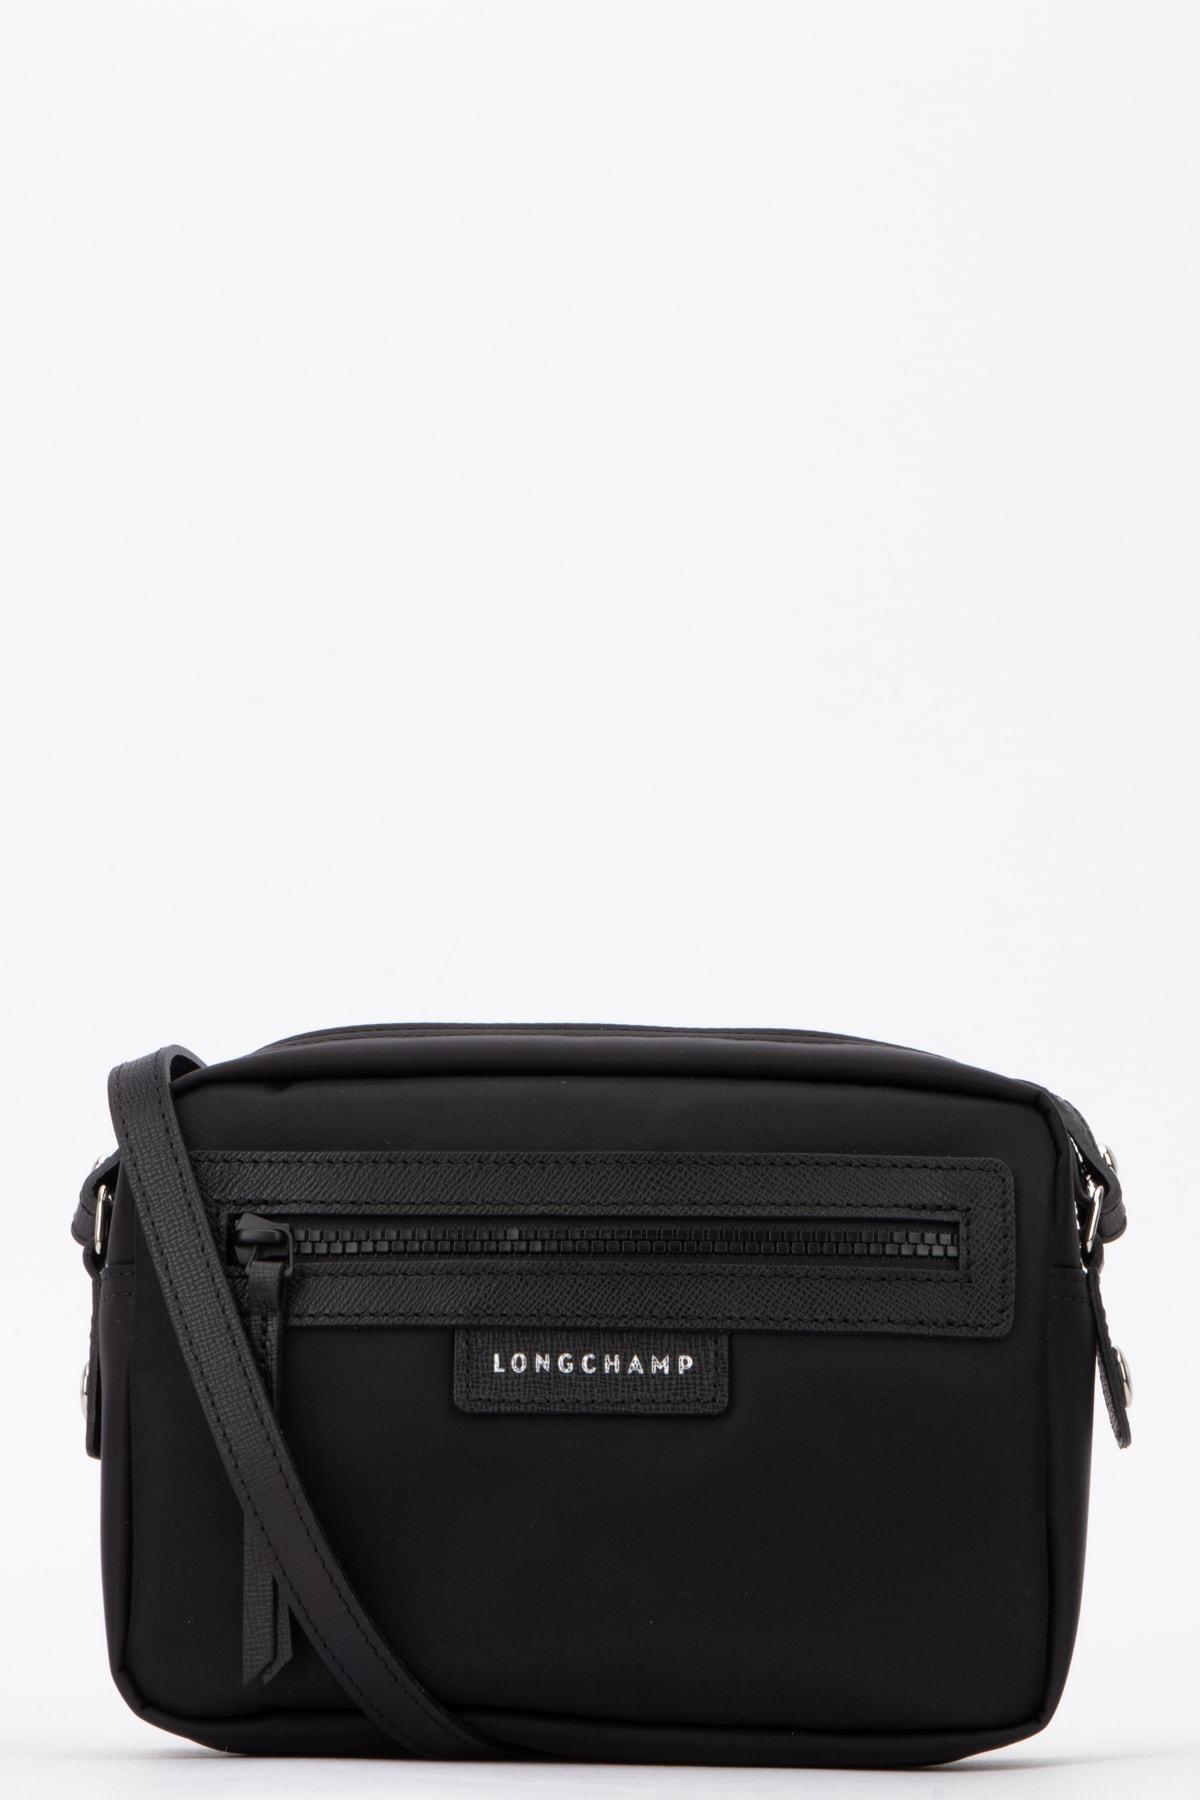 Longchamp Synthetic Le Pliage Neo Camera Bag in Black - Lyst